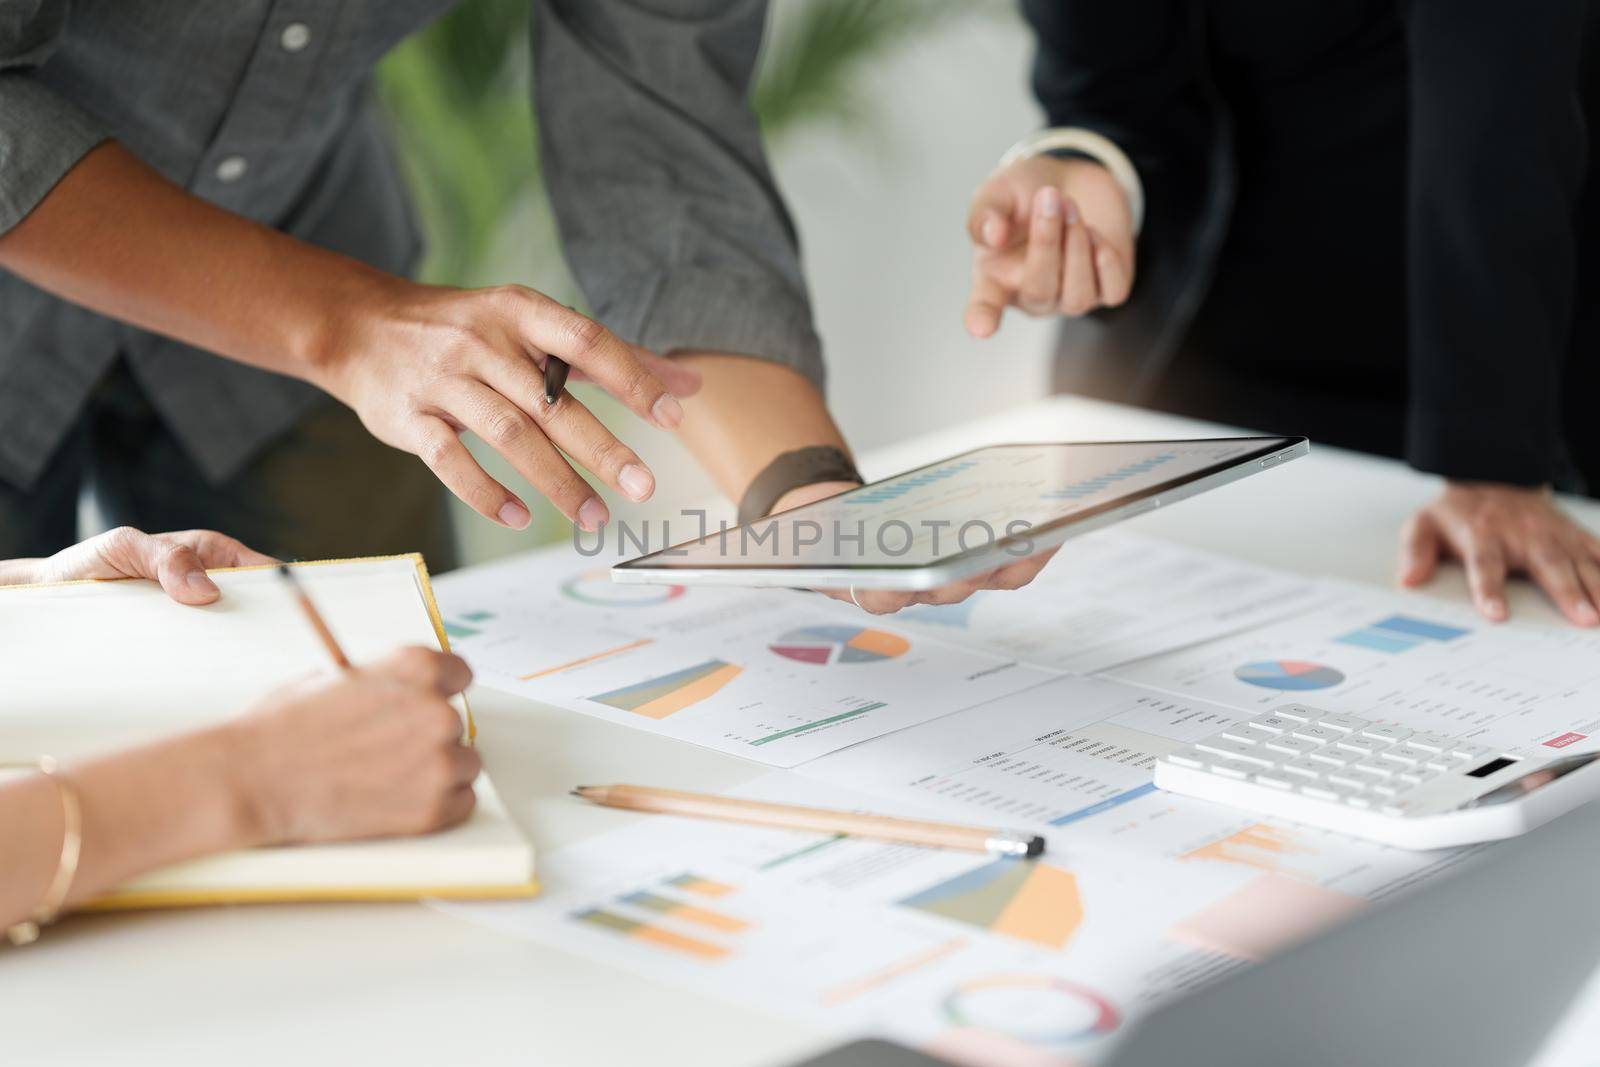 Group of business people working at workplace. Business team hands at working with financial plan, meeting, discussion, brainstorm with tablet on office desk